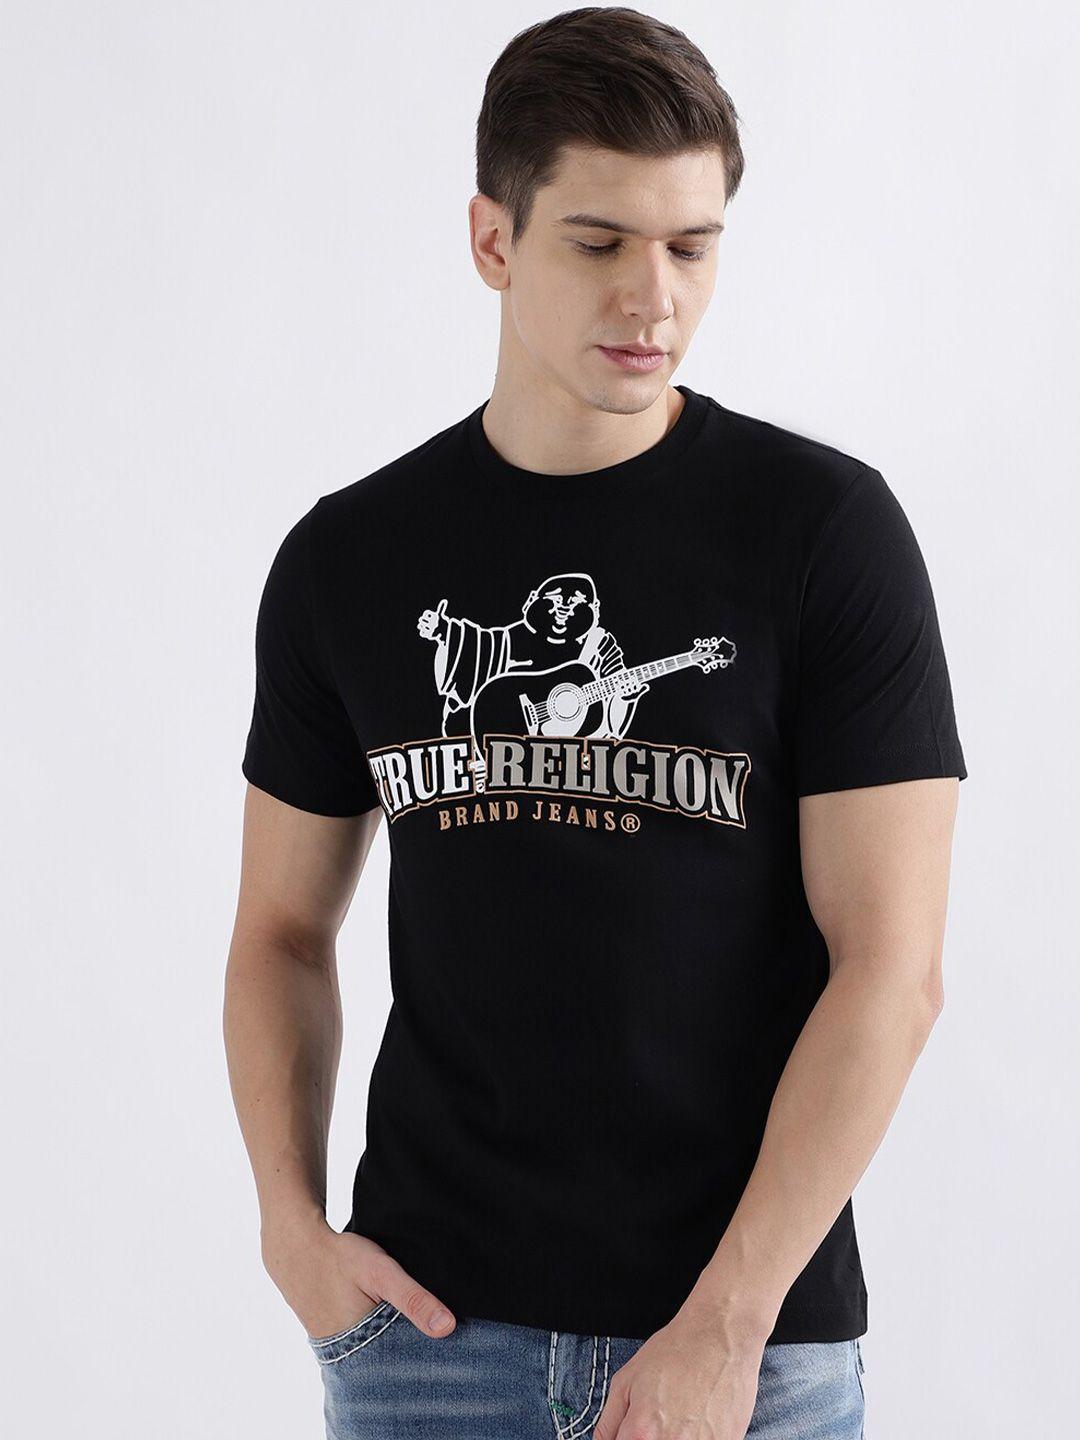 true religion typography printed round neck short sleeves pure cotton t-shirt